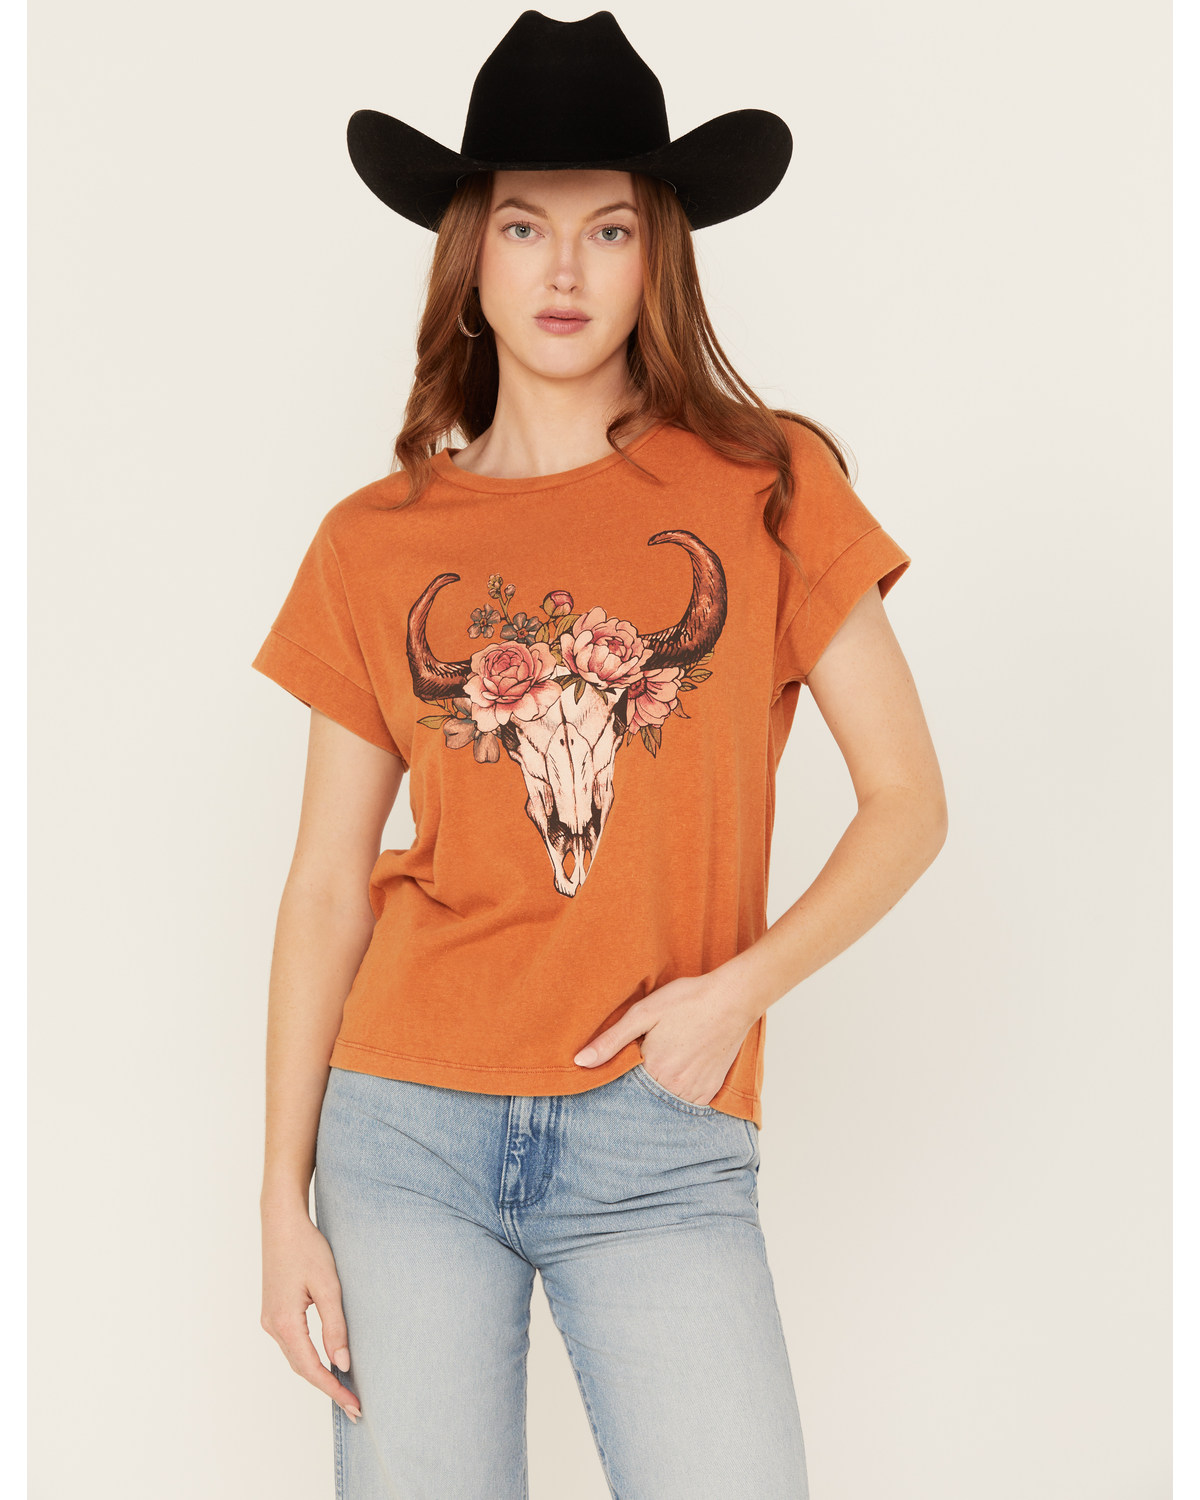 White Crow Women's Floral Steer Head Graphic Tee